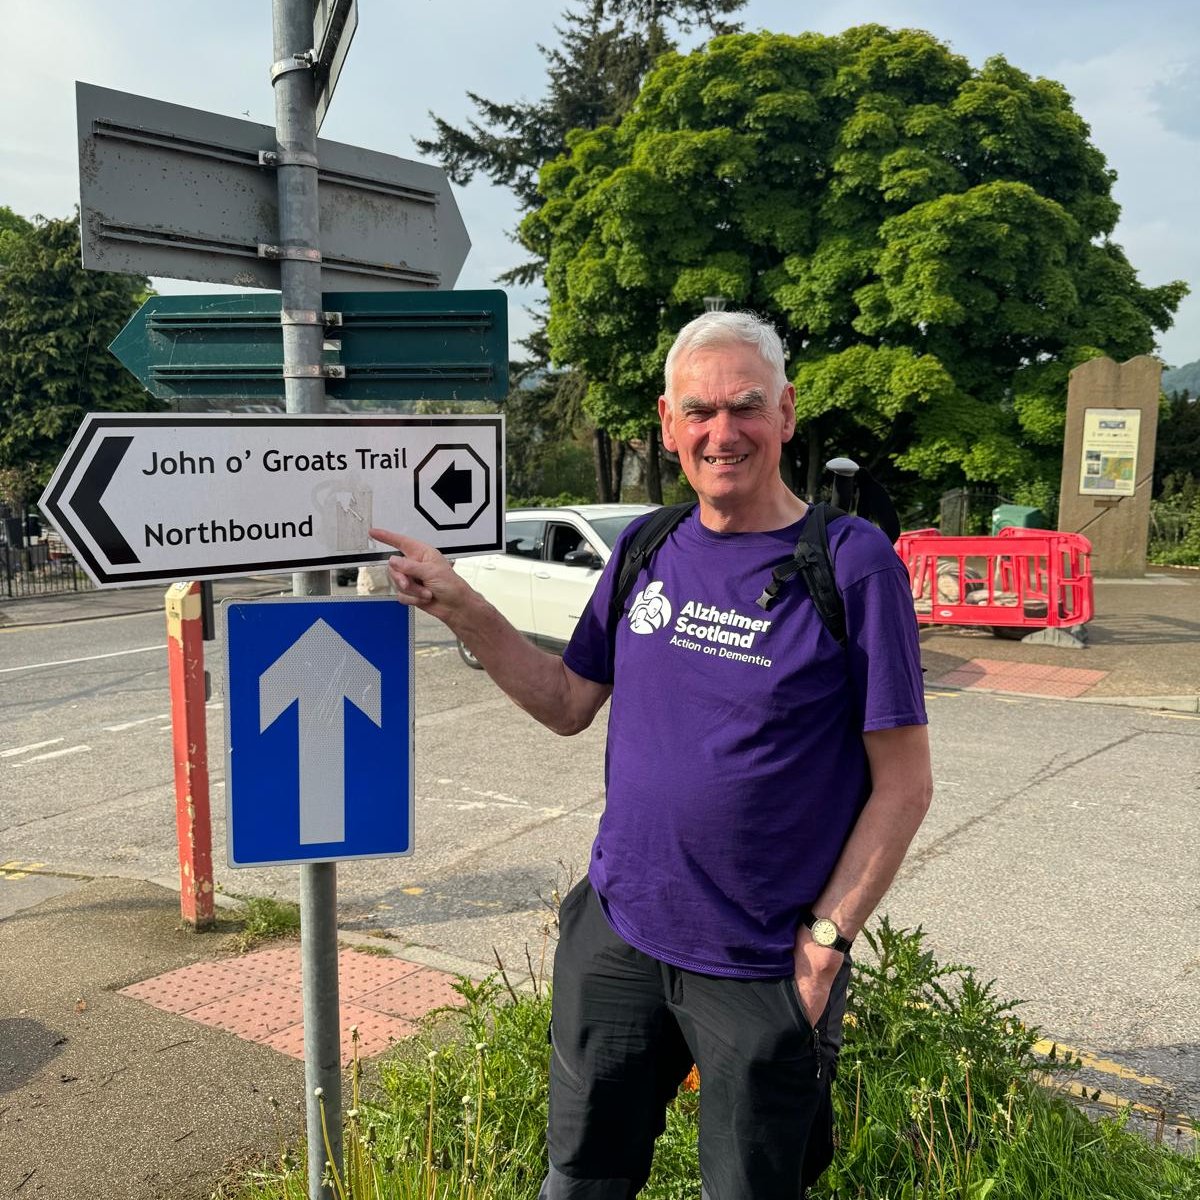 He's on his way!

Frank Stephen is tackling the #JOGTrail as part of his mission to raise funds for @alzscot, for his wife Moira. 

Moira was diagonsed with Alzheimers in 2019, and has recently been admitted to a care home.

If you wish to donate - link in comments below 👇